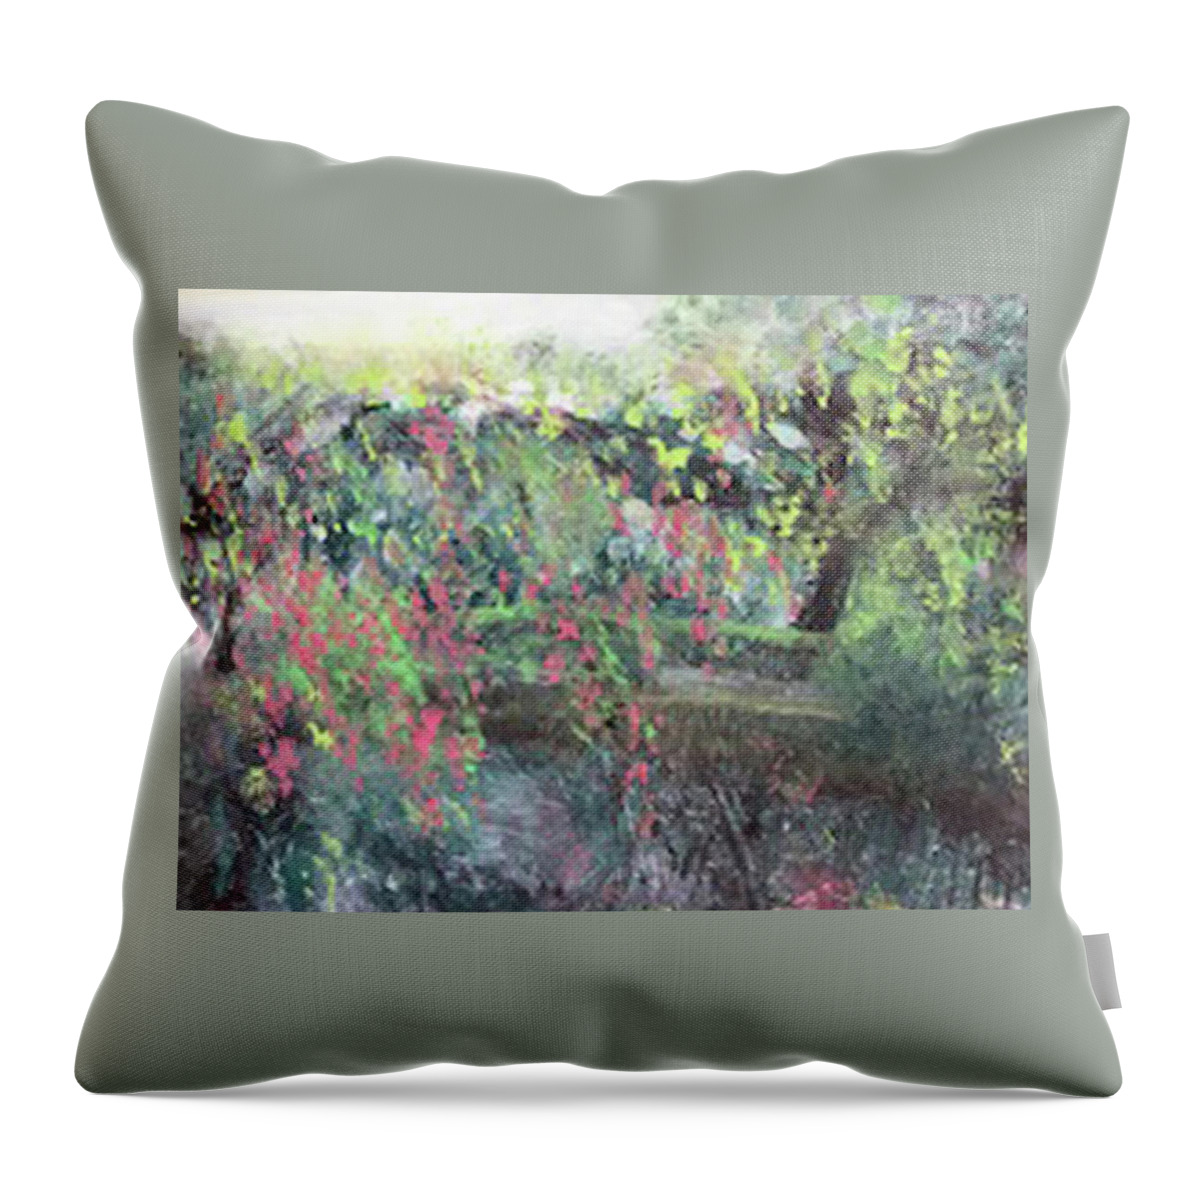 Impressionism Throw Pillow featuring the painting Giverny Bridge in the Morning Mist by Susan Grunin